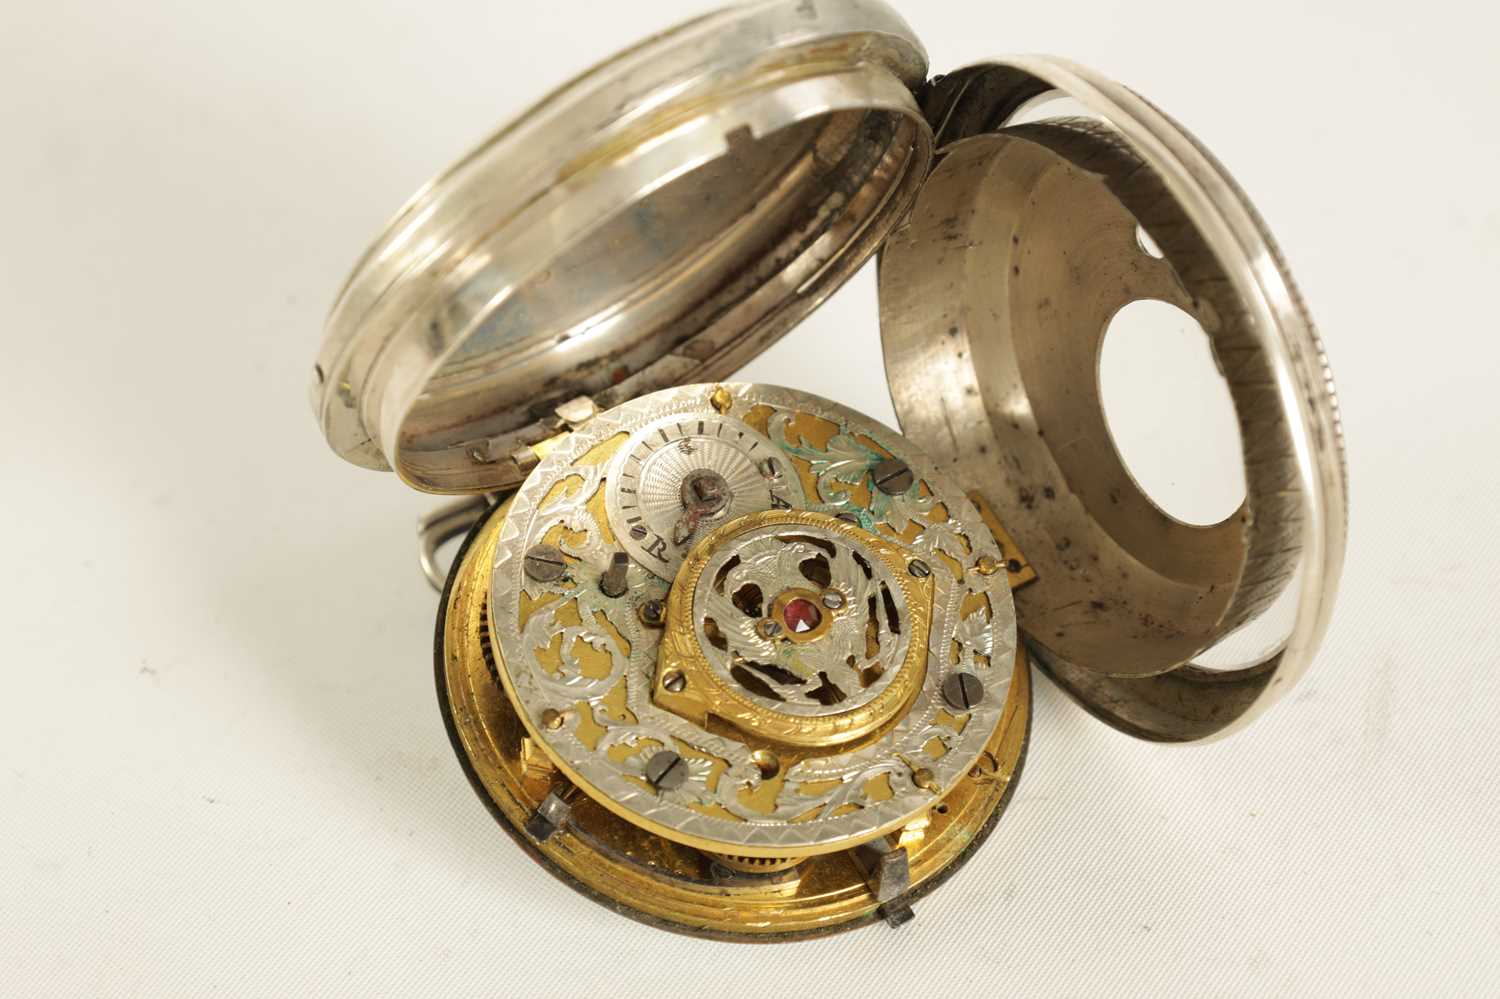 A LATE 18TH CENTURY CONTINENTAL PAIR CASE VERGE POCKET WATCH - Image 5 of 9